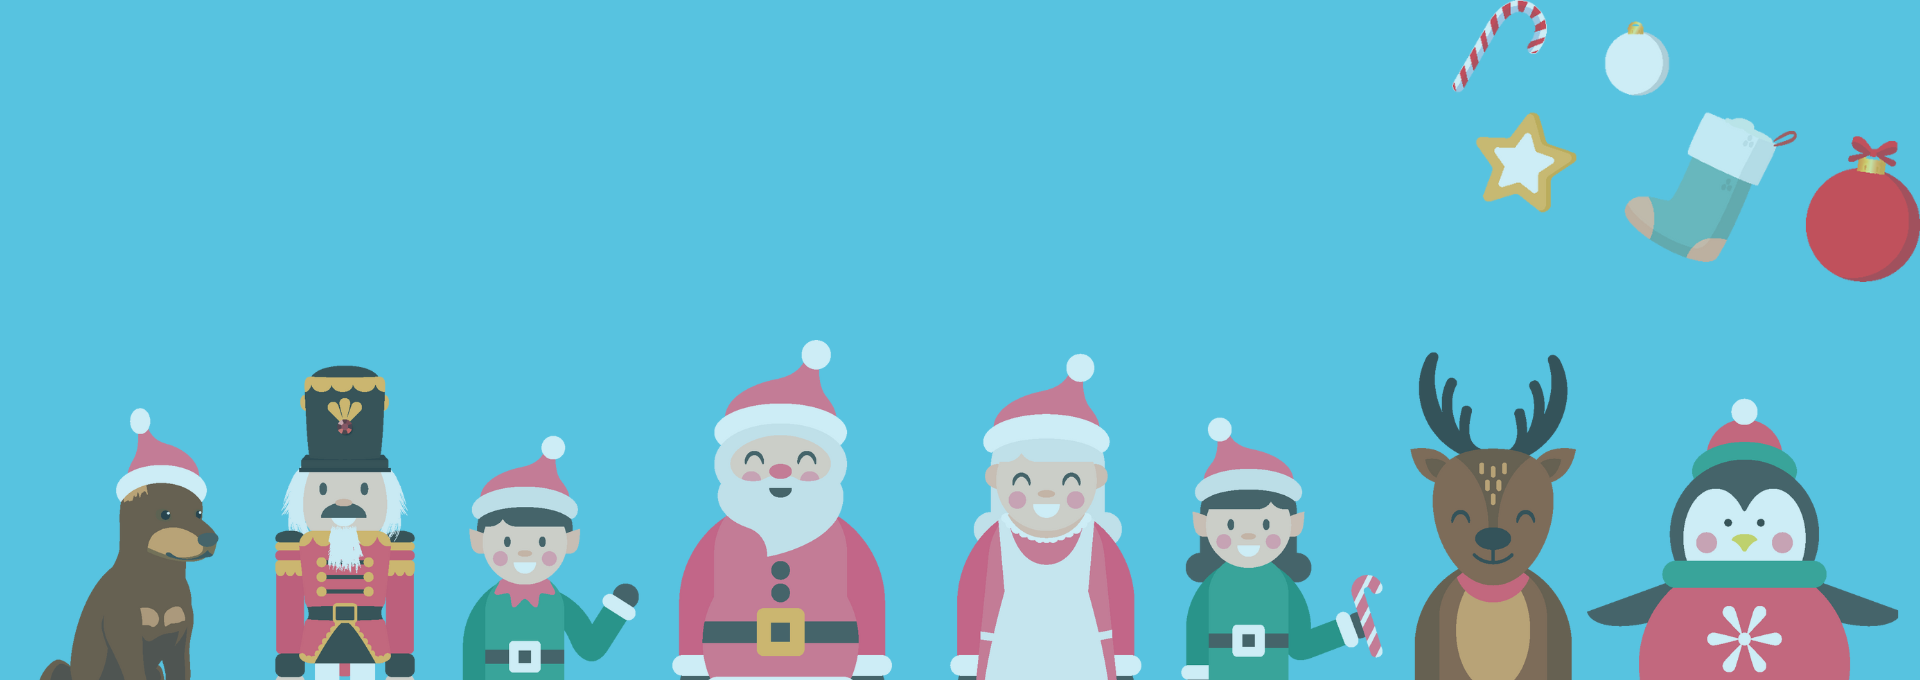 Illustrated Christmas characters on a blue background